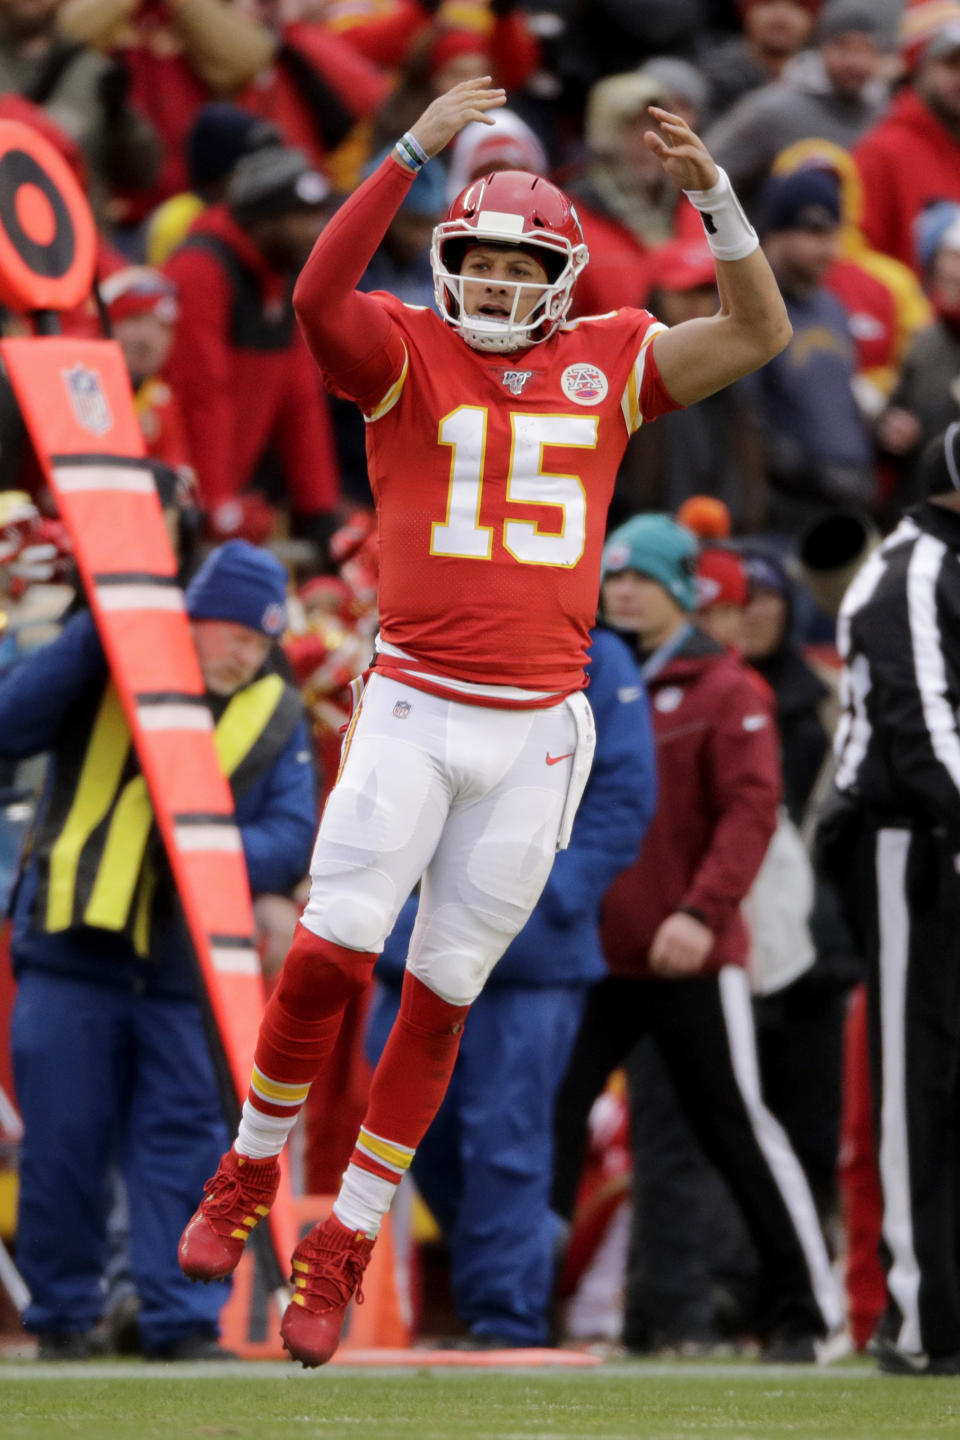 Kansas City Chiefs quarterback Patrick Mahomes (15) reacts during the second half of an NFL football game against the Los Angeles Chargers in Kansas City, Mo., Sunday, Dec. 29, 2019. (AP Photo/Charlie Riedel)